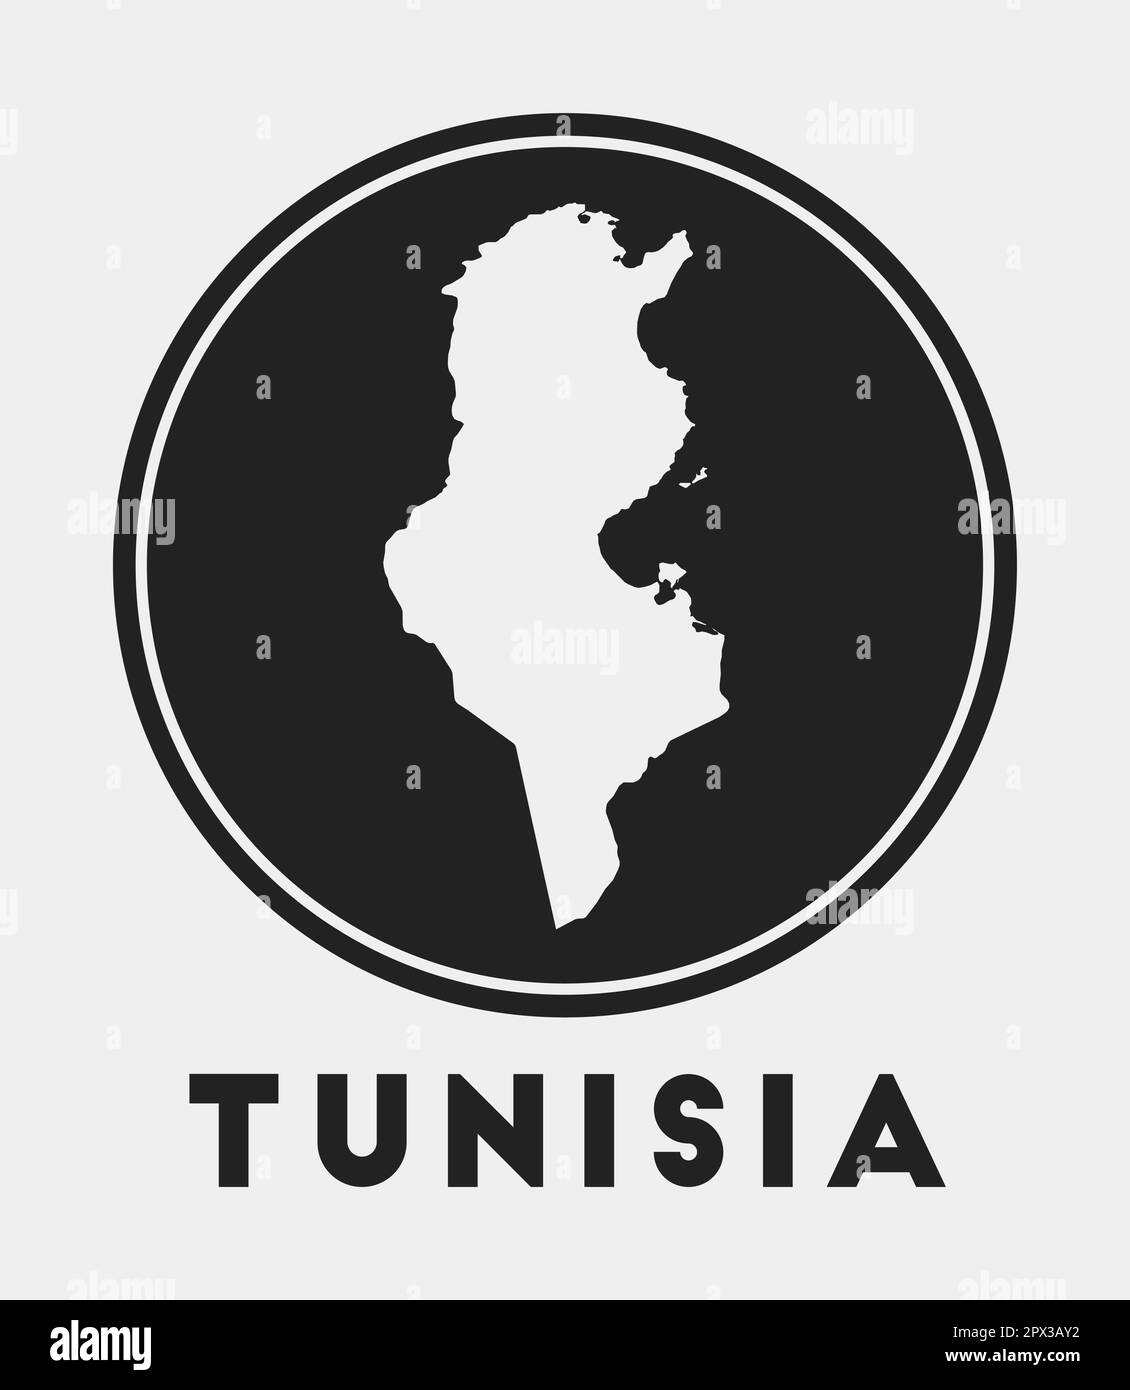 Tunisia icon. Round logo with country map and title. Stylish Tunisia badge with map. Vector illustration. Stock Vector